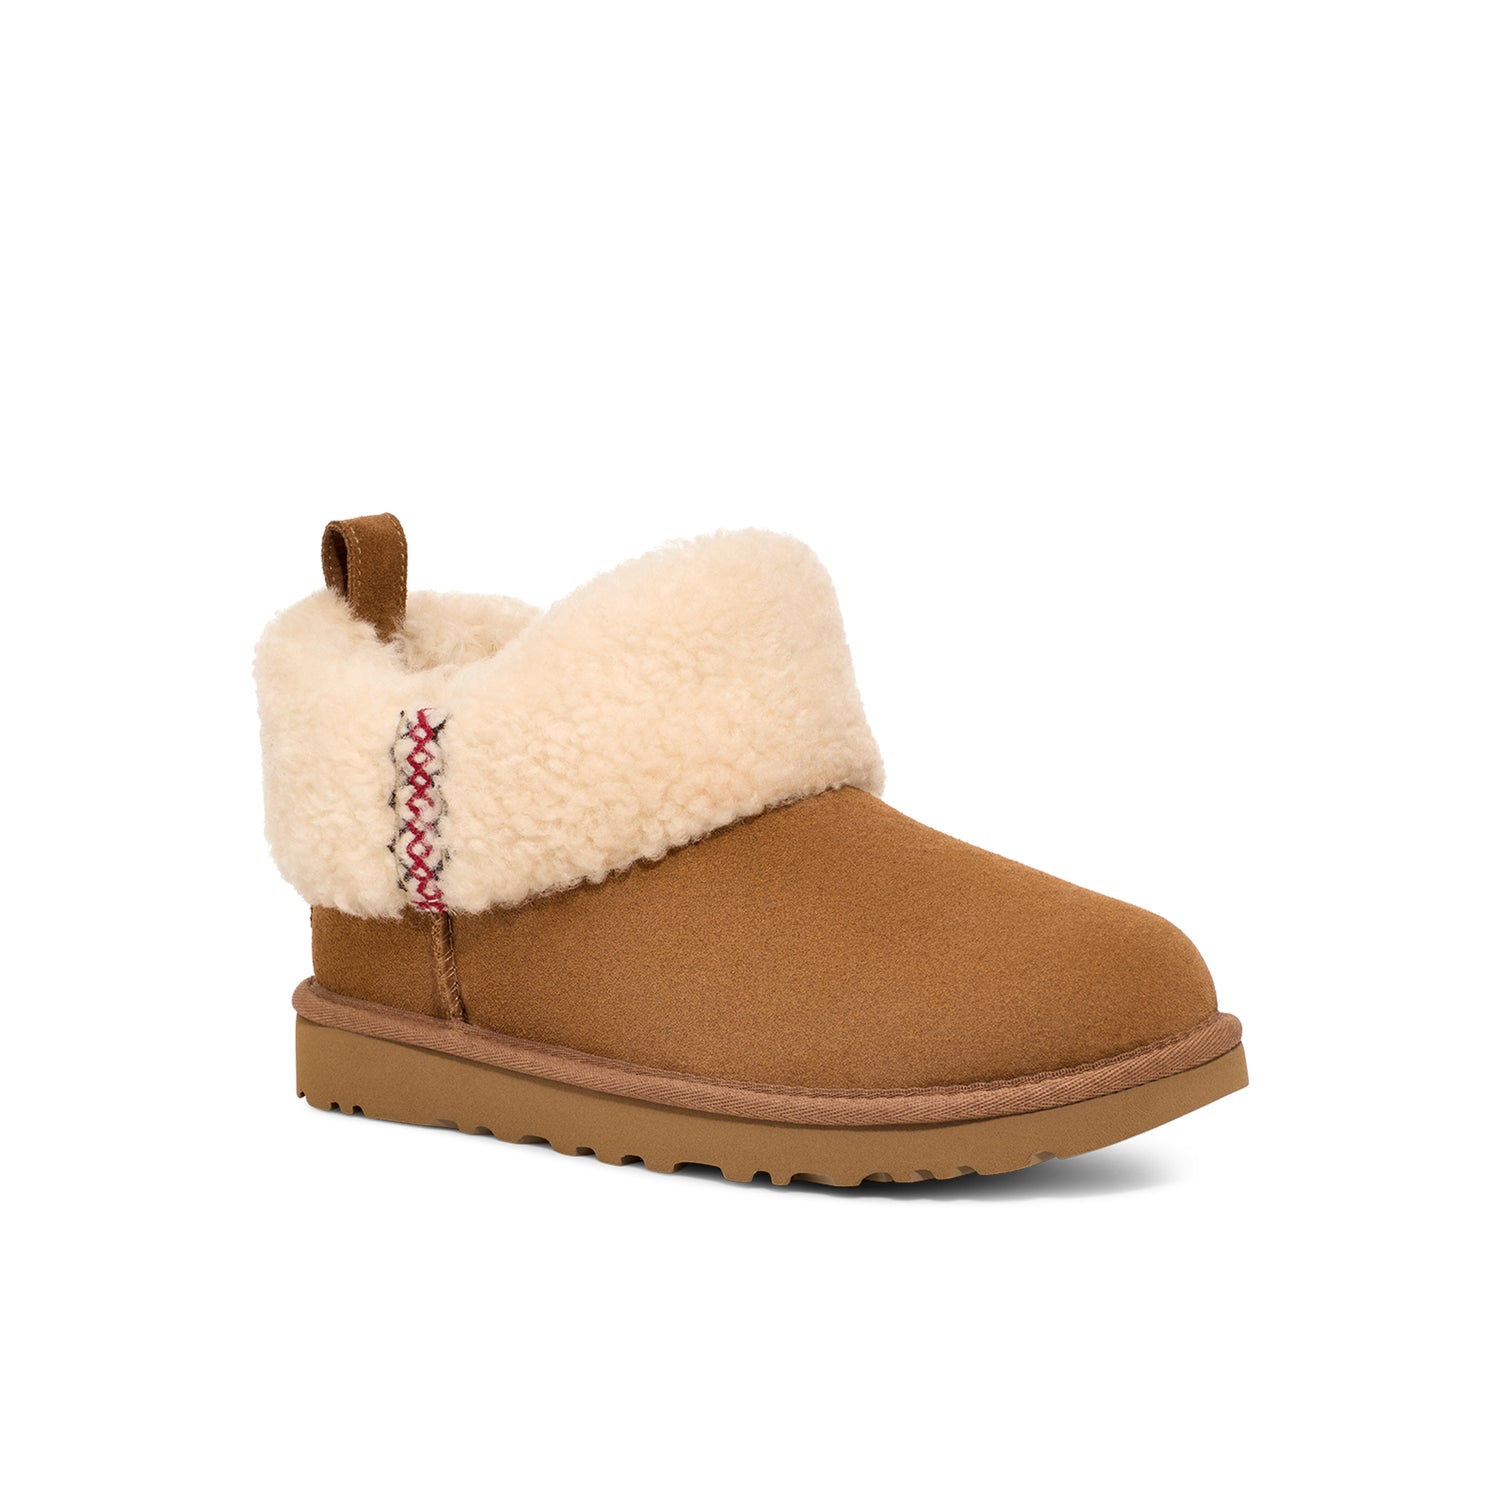 Featured UGG® Shoes